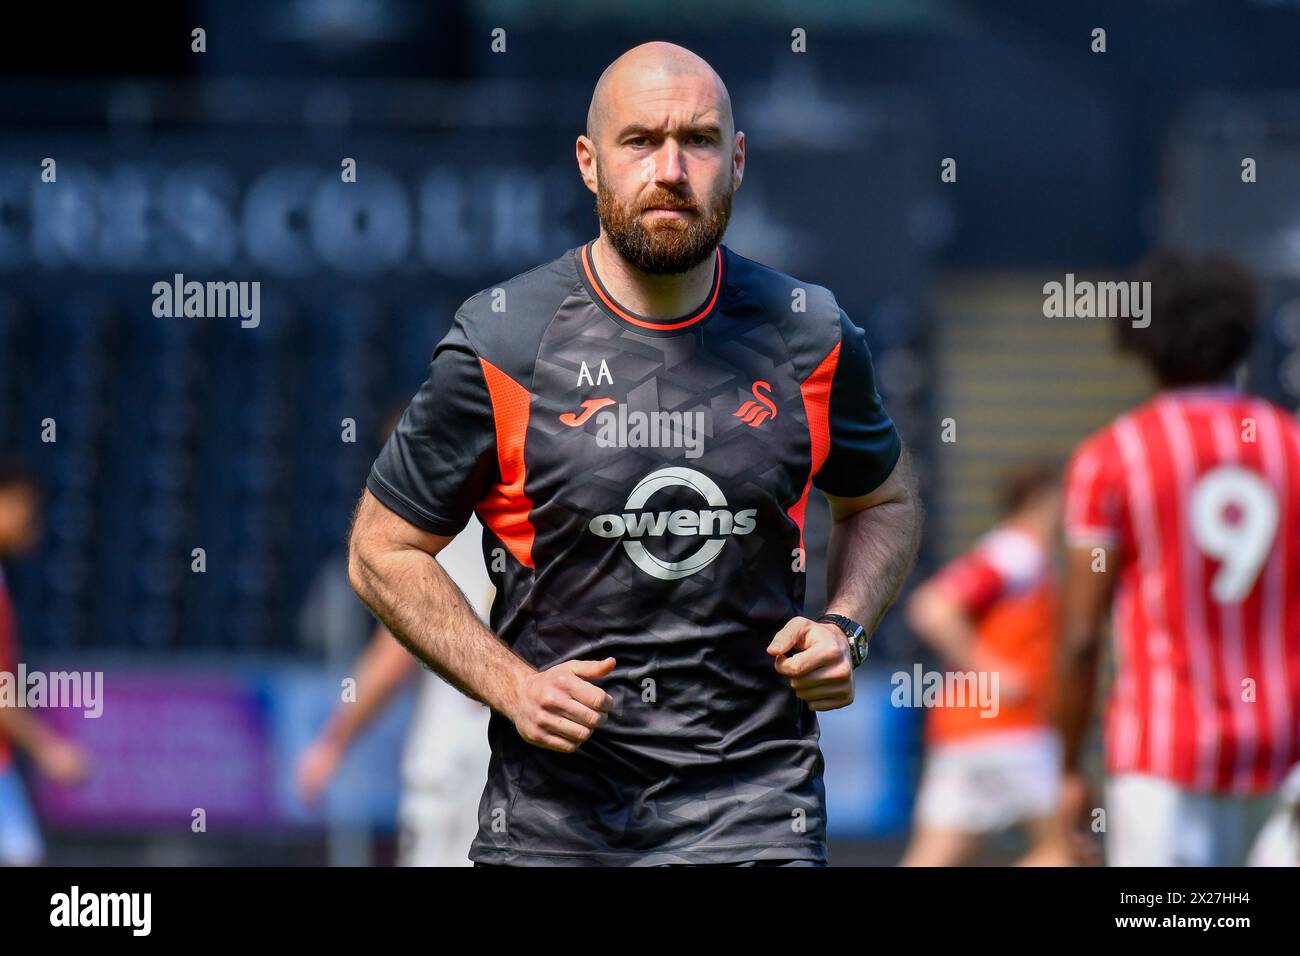 Swansea, Wales. 20 April 2024. Alun Andrews Swansea City Academy Physical Development Coach at half time during the Under 21 Professional Development League match between Swansea City and Bristol City at the Swansea.com Stadium in Swansea, Wales, UK on 20 April 2024. Credit: Duncan Thomas/Majestic Media/Alamy Live News. Stock Photo